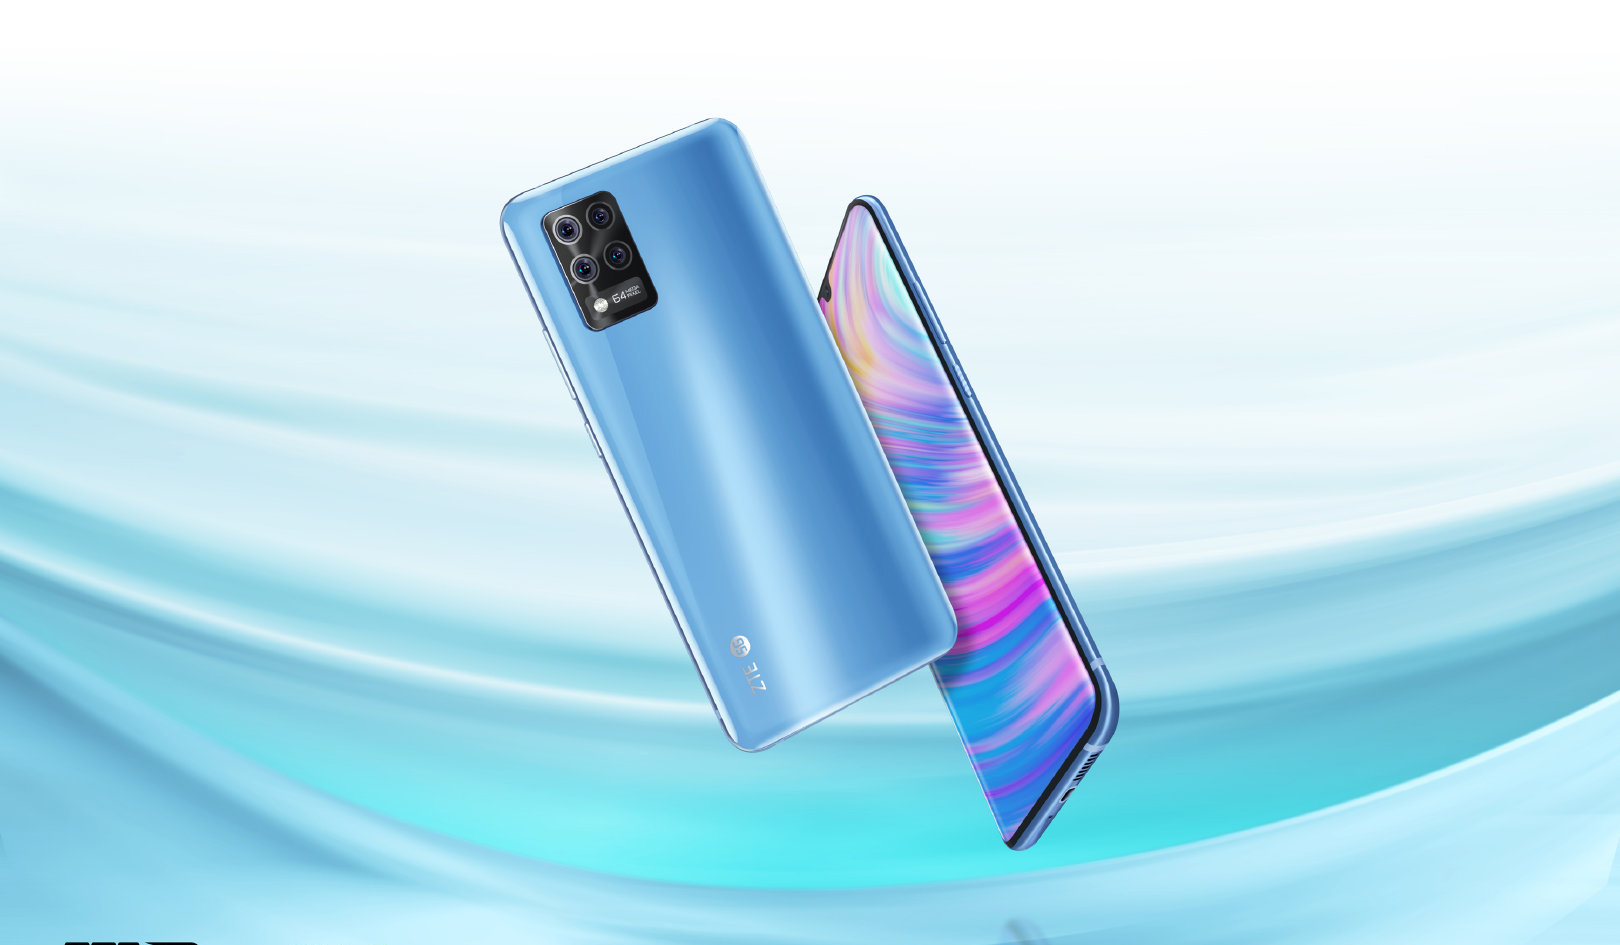 ZTE Unveils Blade 20 Pro 5G With Snapdragon 765G And Quad Cameras